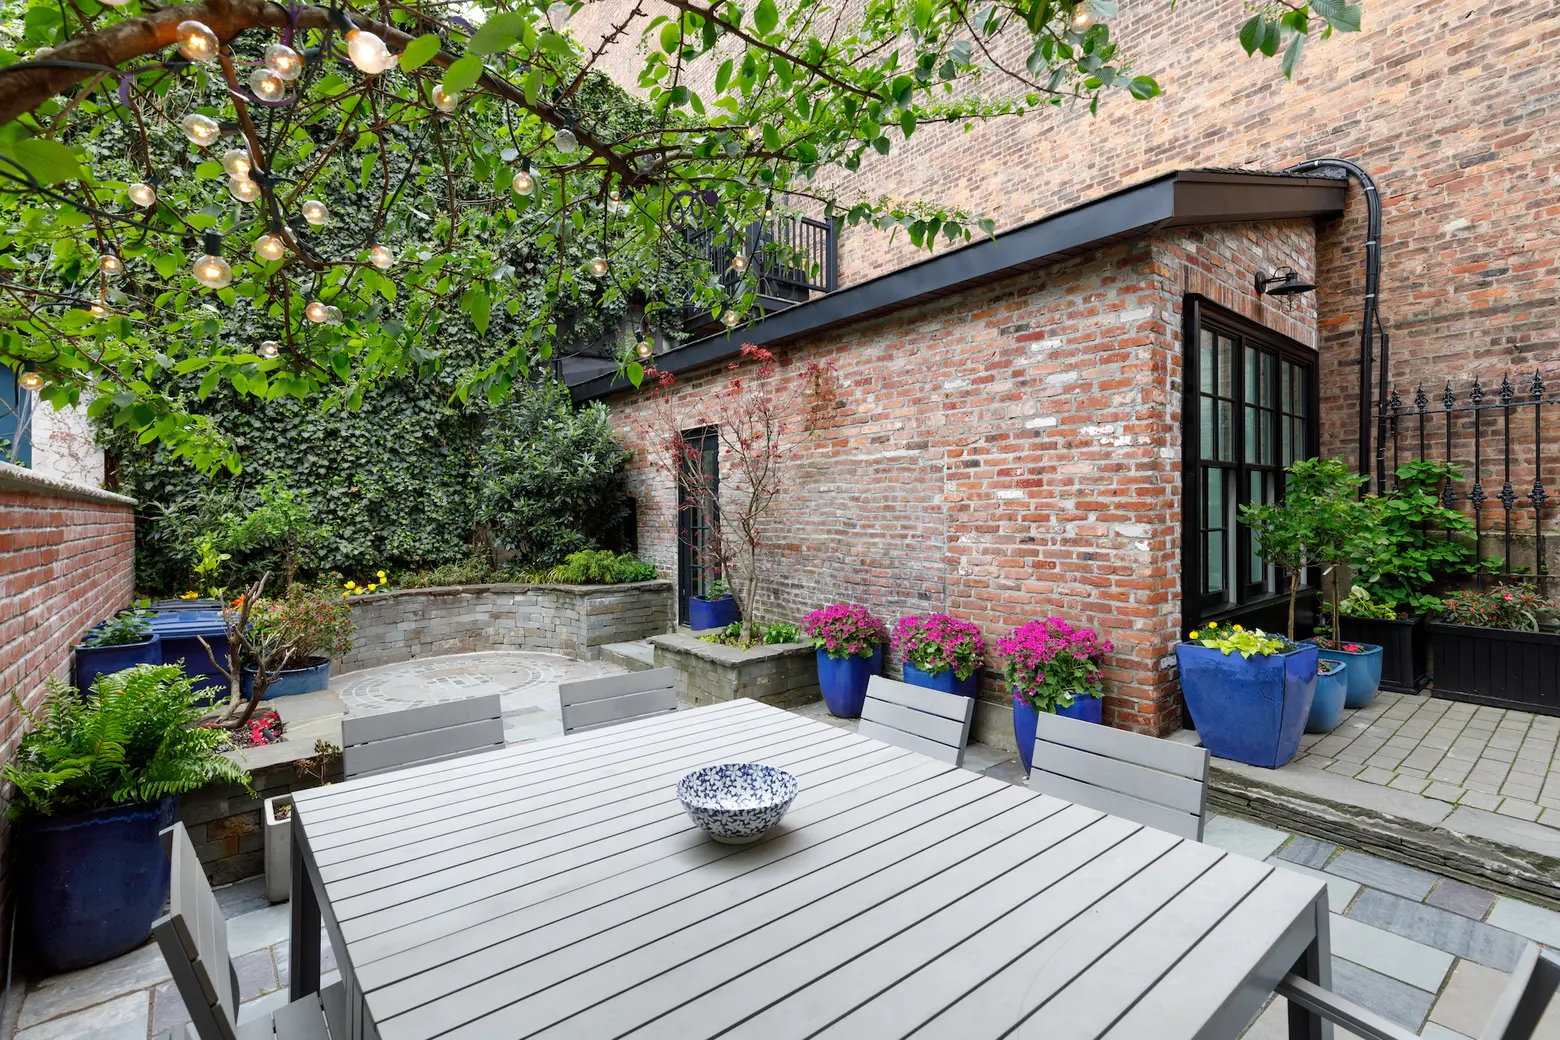 This $3.5M Park Slope townhouse comes with private parking and an enchanted garden